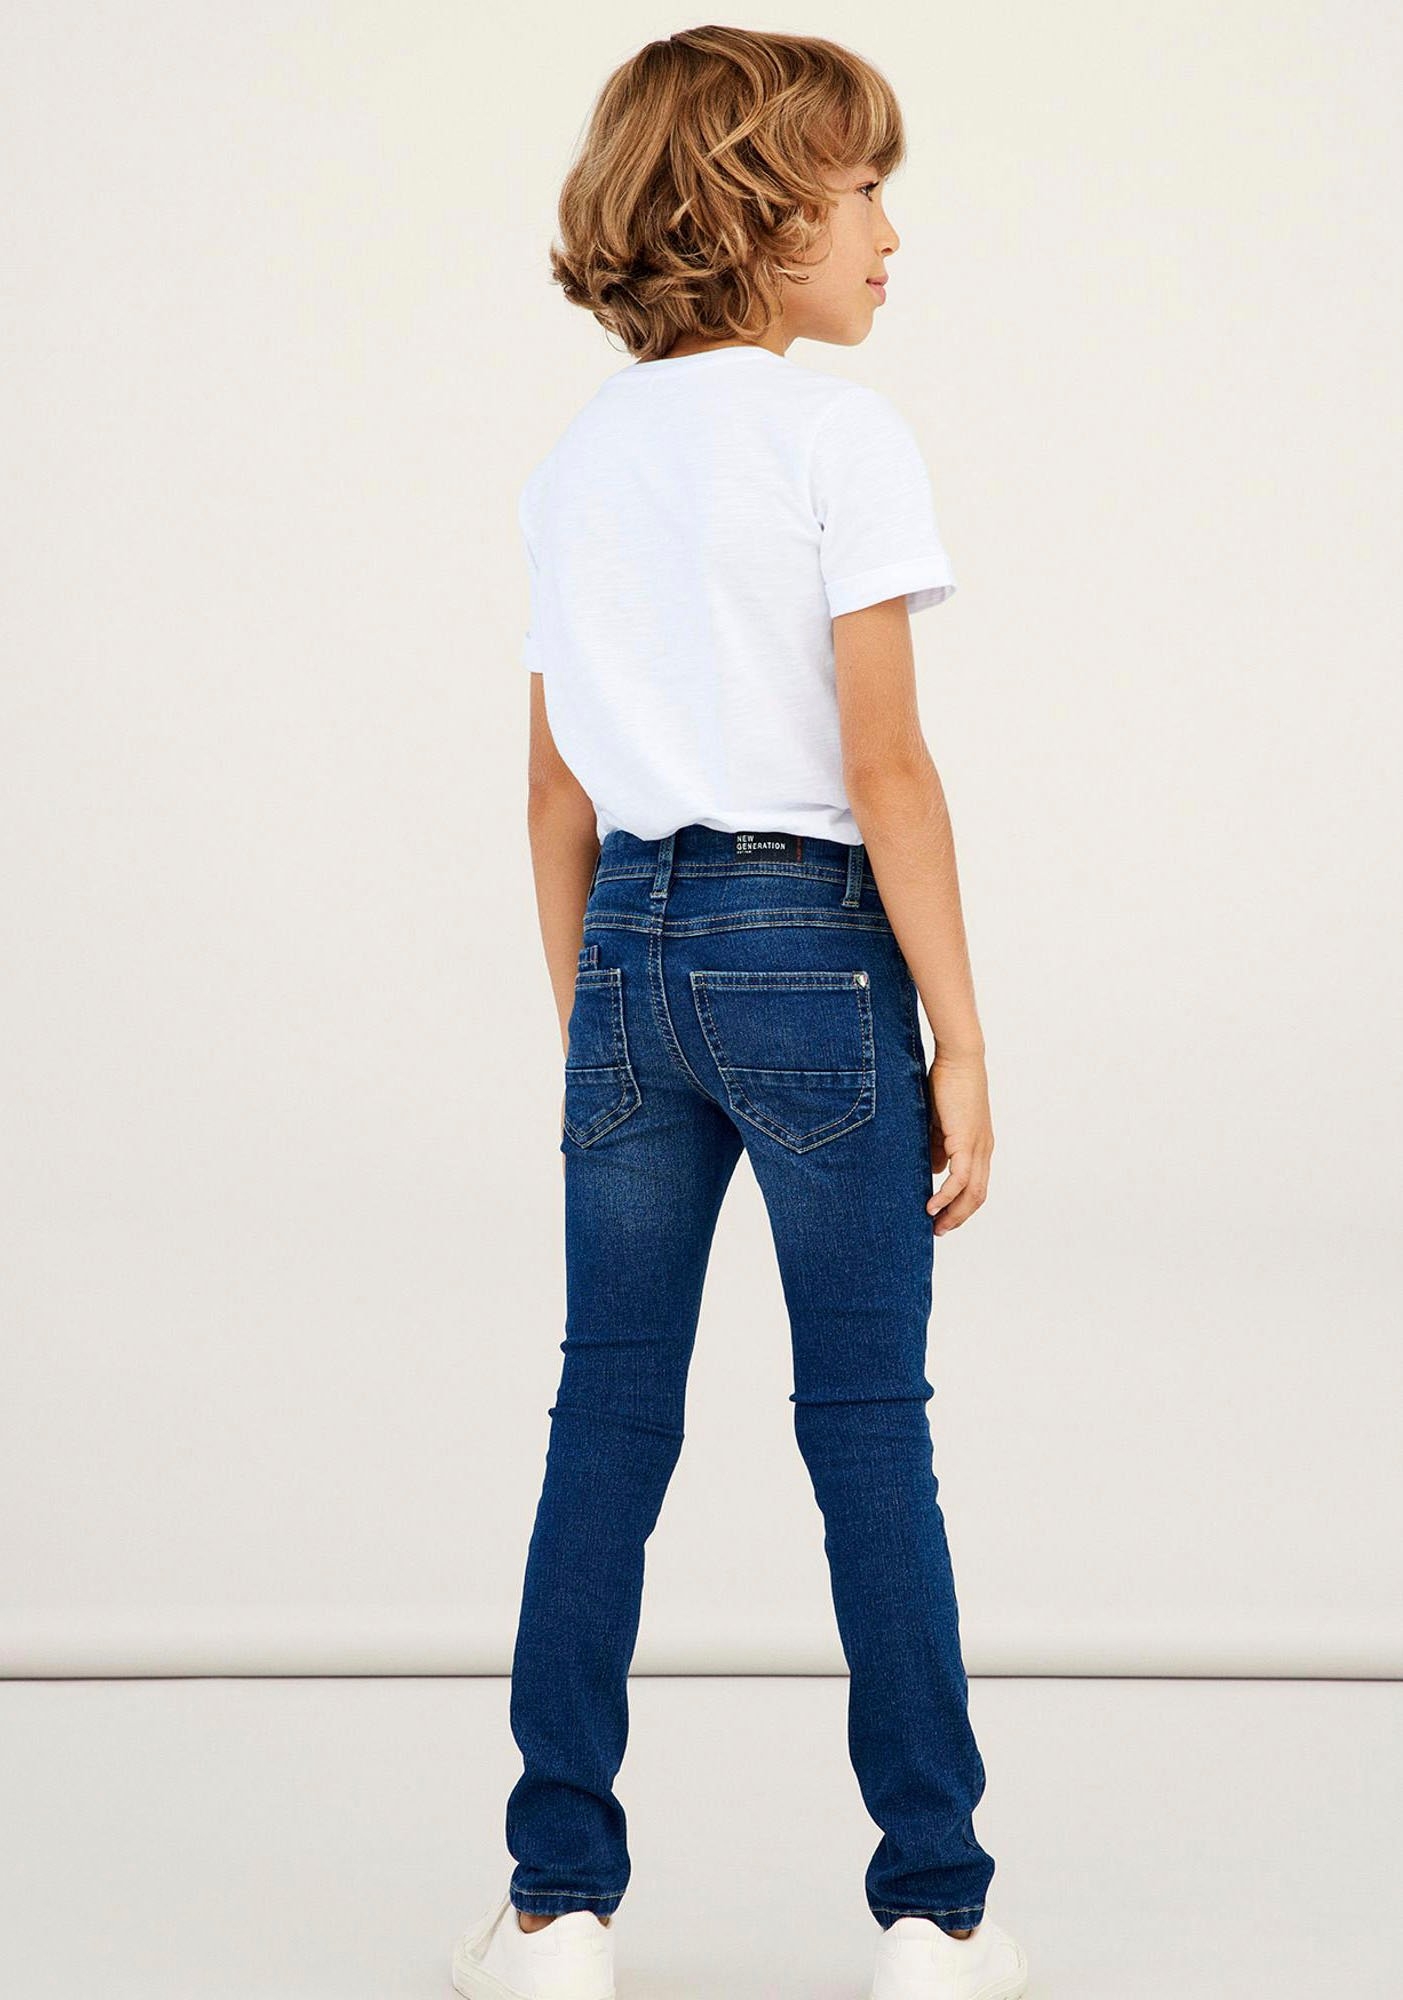 It jeans online | Name de OTTO PANT DNMTAUL 3618 shop in Stretch NKMTHEO